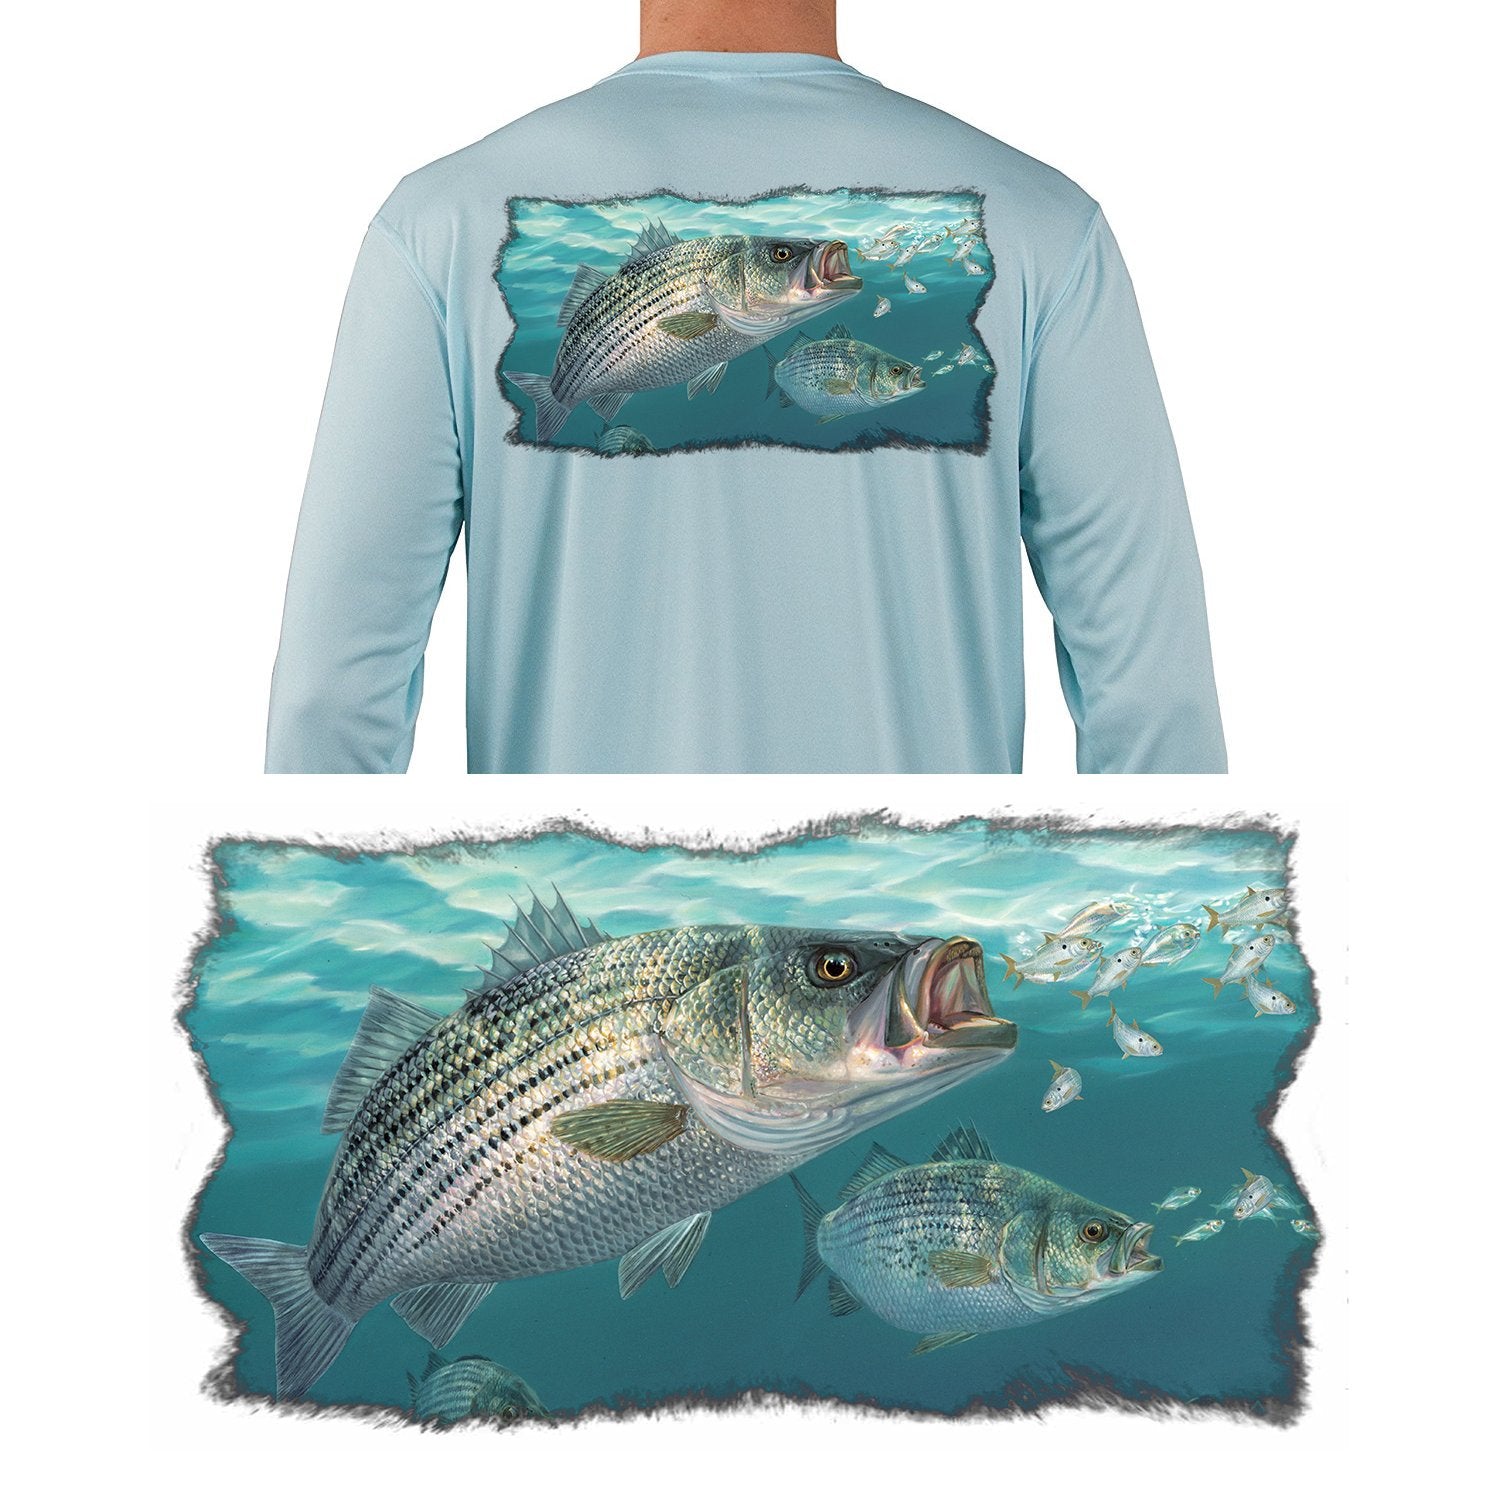 Striper, Striped Bass Collection of Fishing Hats, Decals & Fishing Shirts